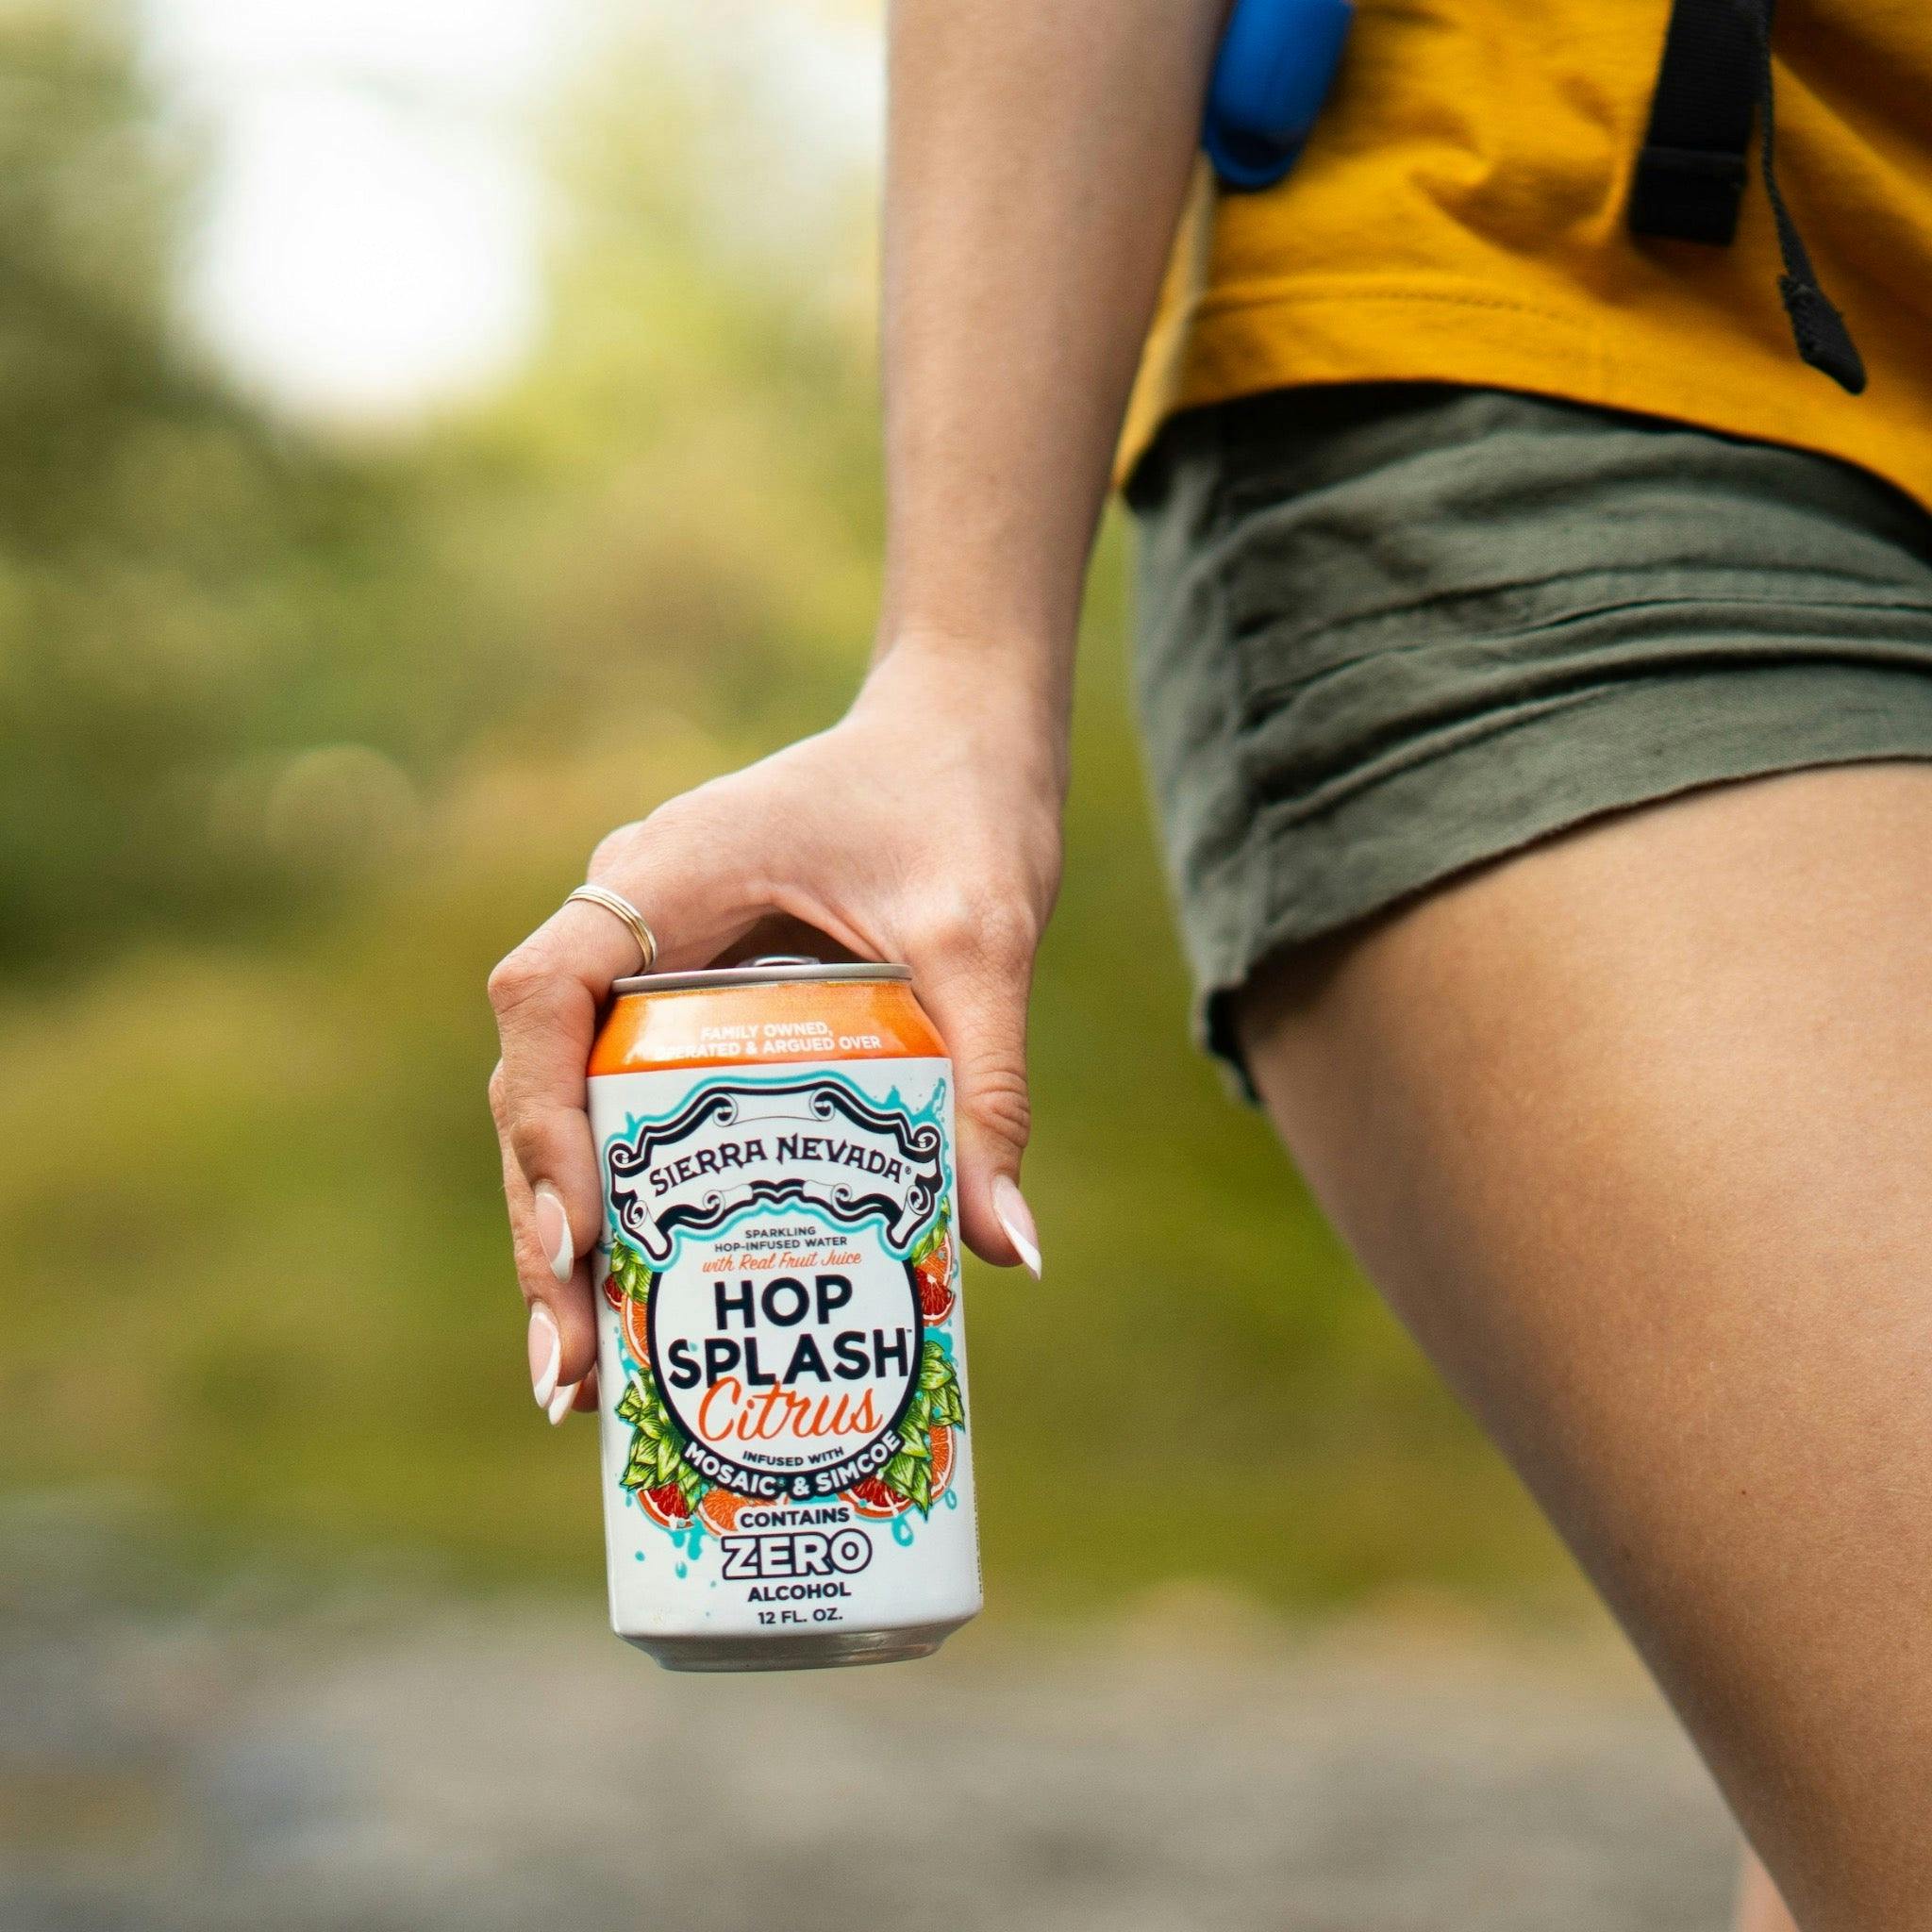 Sierra Nevada Brewing Co. Hop Splash Citrus Non-Alcoholic Sparkling Hop Water - A female hiker carries a can of refreshing Hop Splash Citrus in her hand